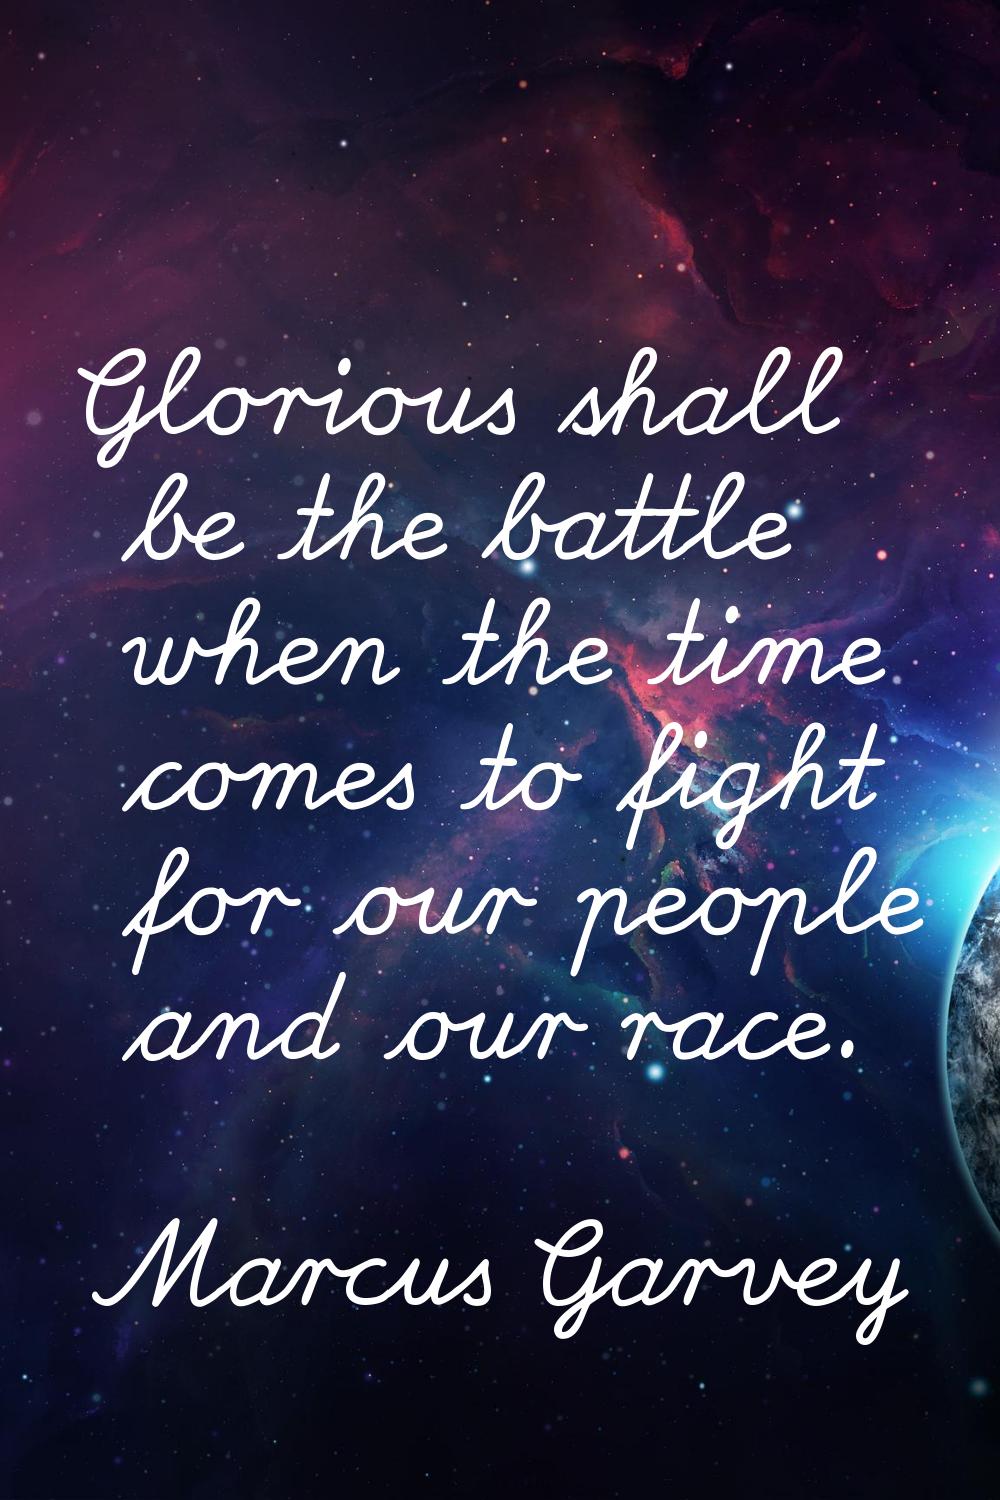 Glorious shall be the battle when the time comes to fight for our people and our race.